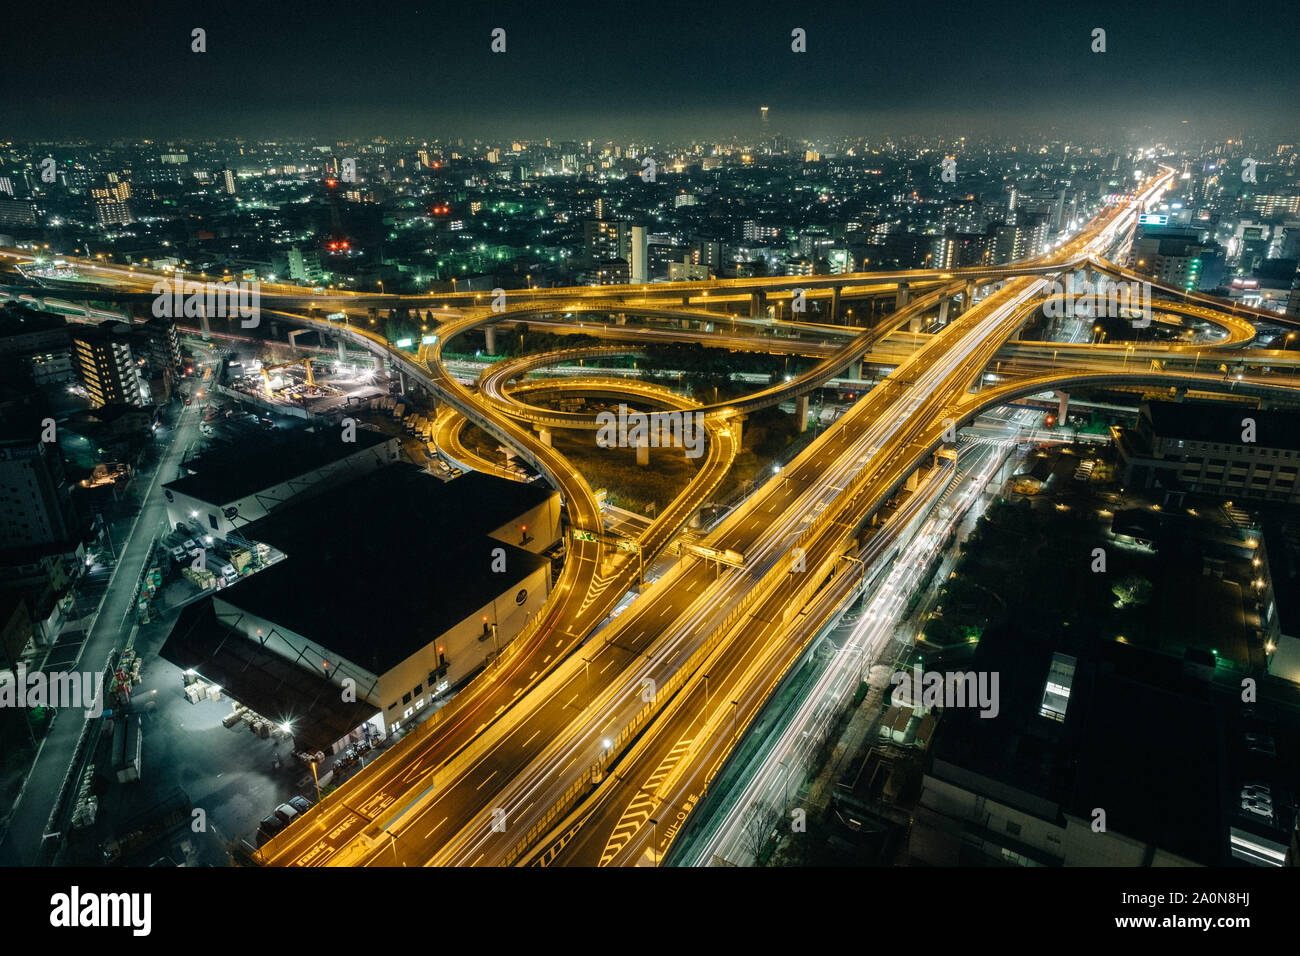 The amazing night view of highway in Osaka, expressway enter the city, night light picture on top view Stock Photo